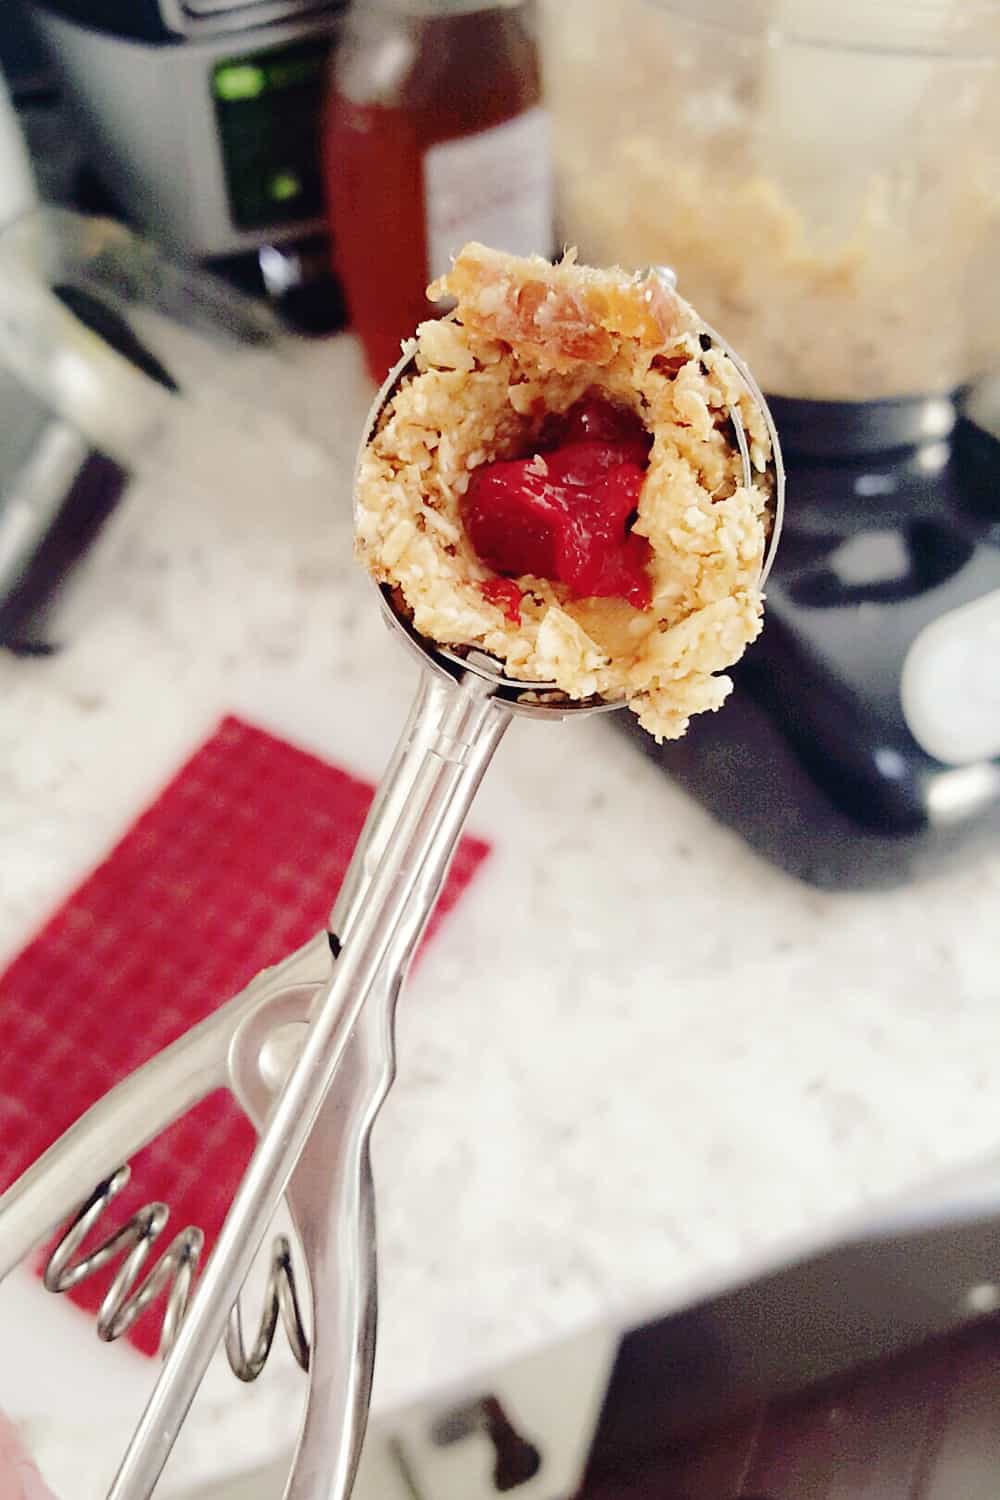 PB&J Surprise Energy Bites are a fun and healthy no bake snack with a peanut butter and oat mixture and a surprise pop of strawberry jelly on the inside. 